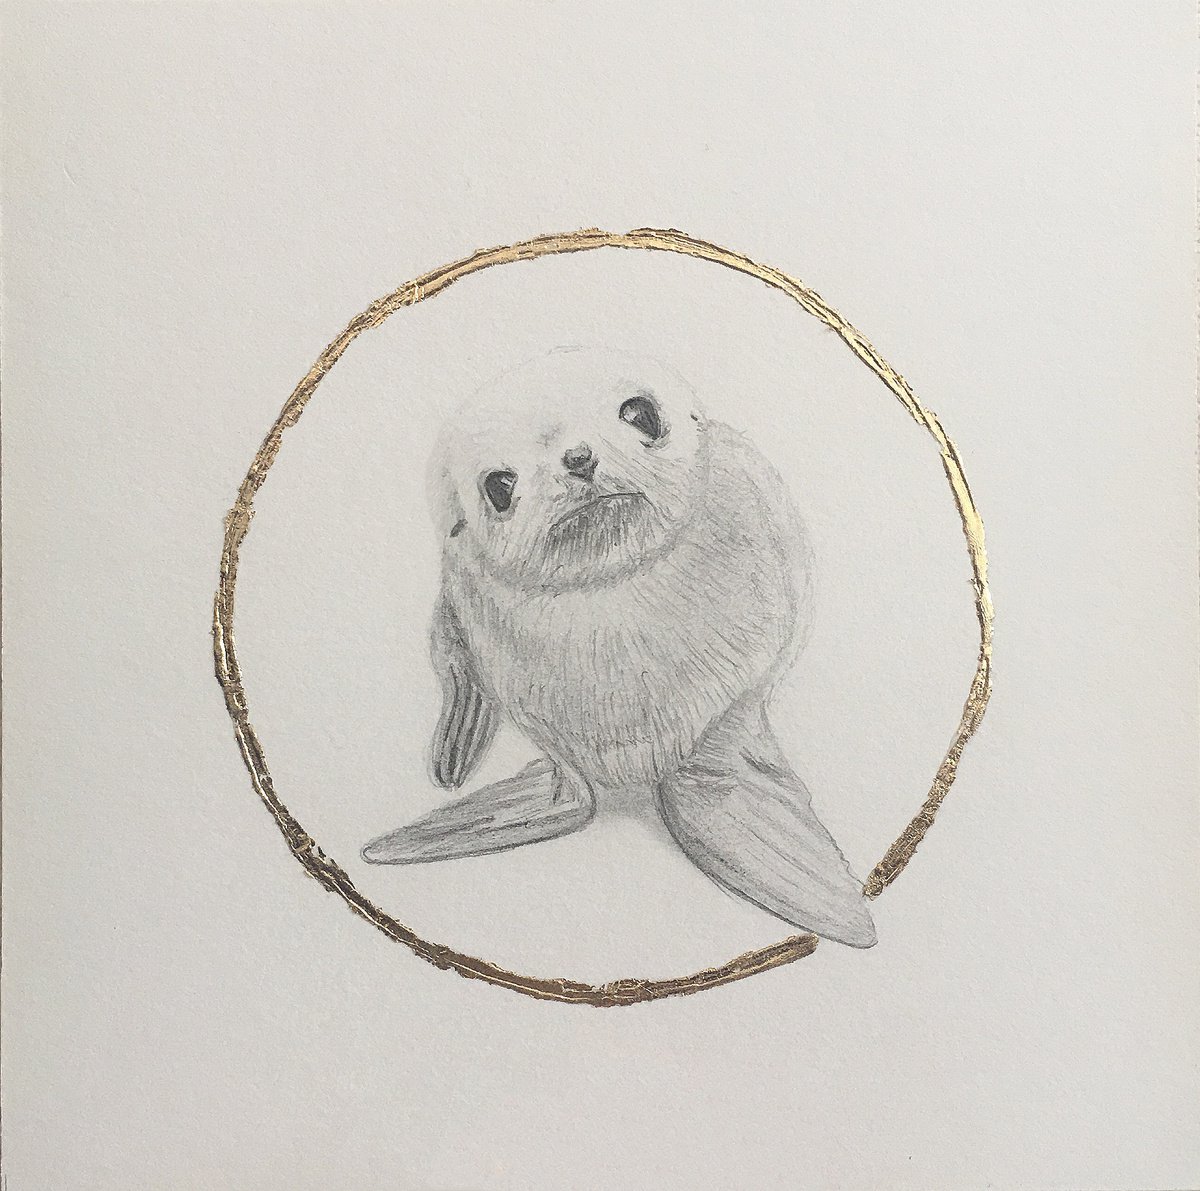 Seal drawing. by Amelia Taylor